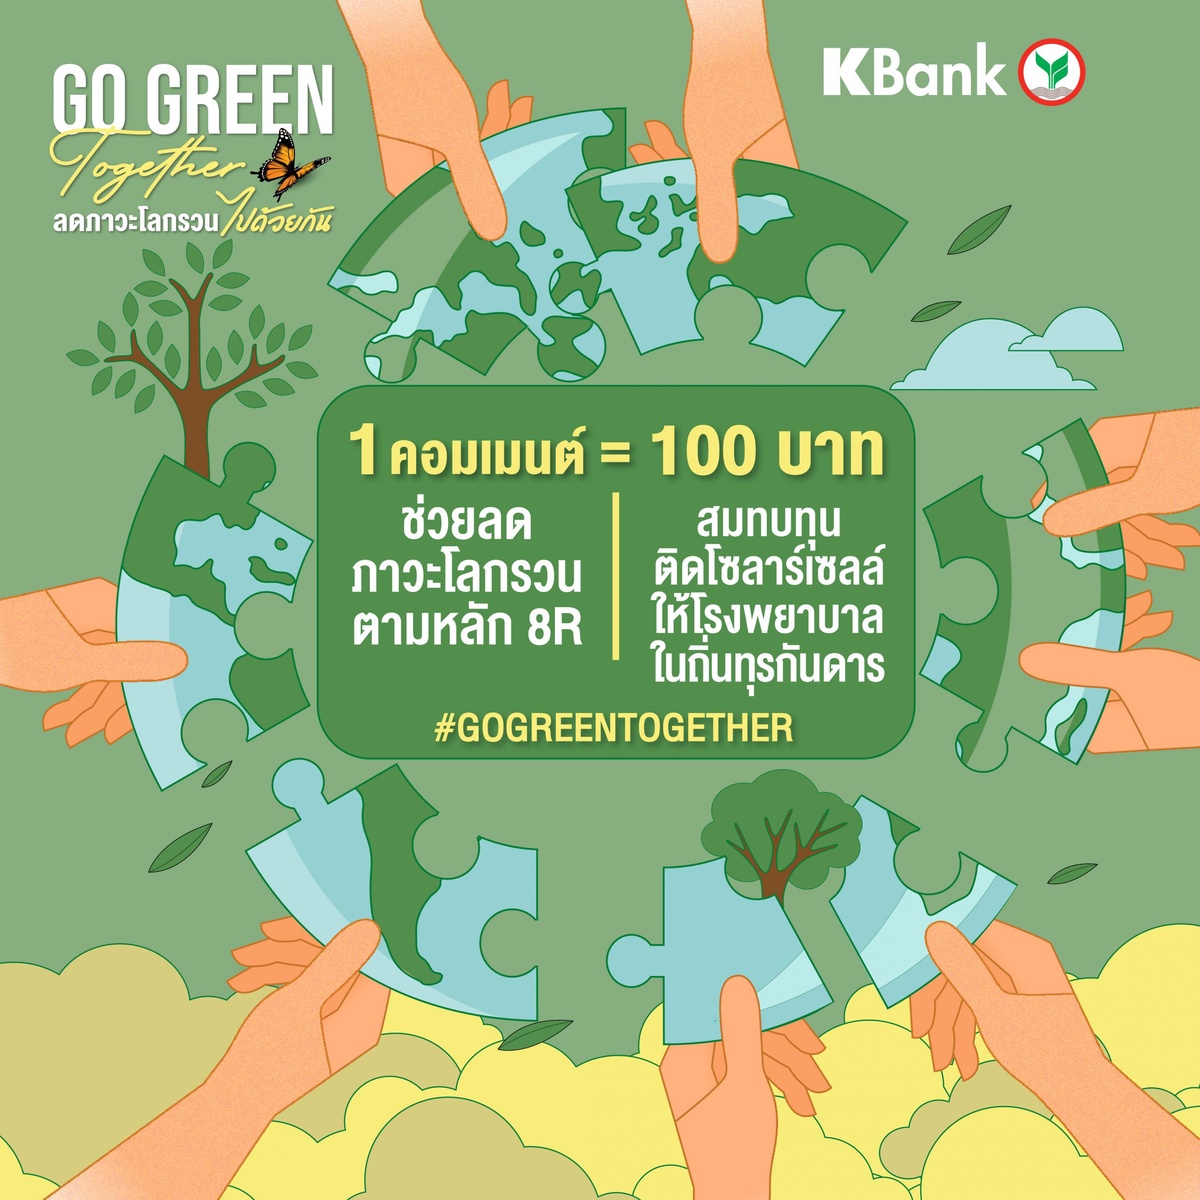 KBank invites all Thais to join the GO GREEN TOGETHER: Let's Unite to Fight Climate Change campaign by sharing a Going